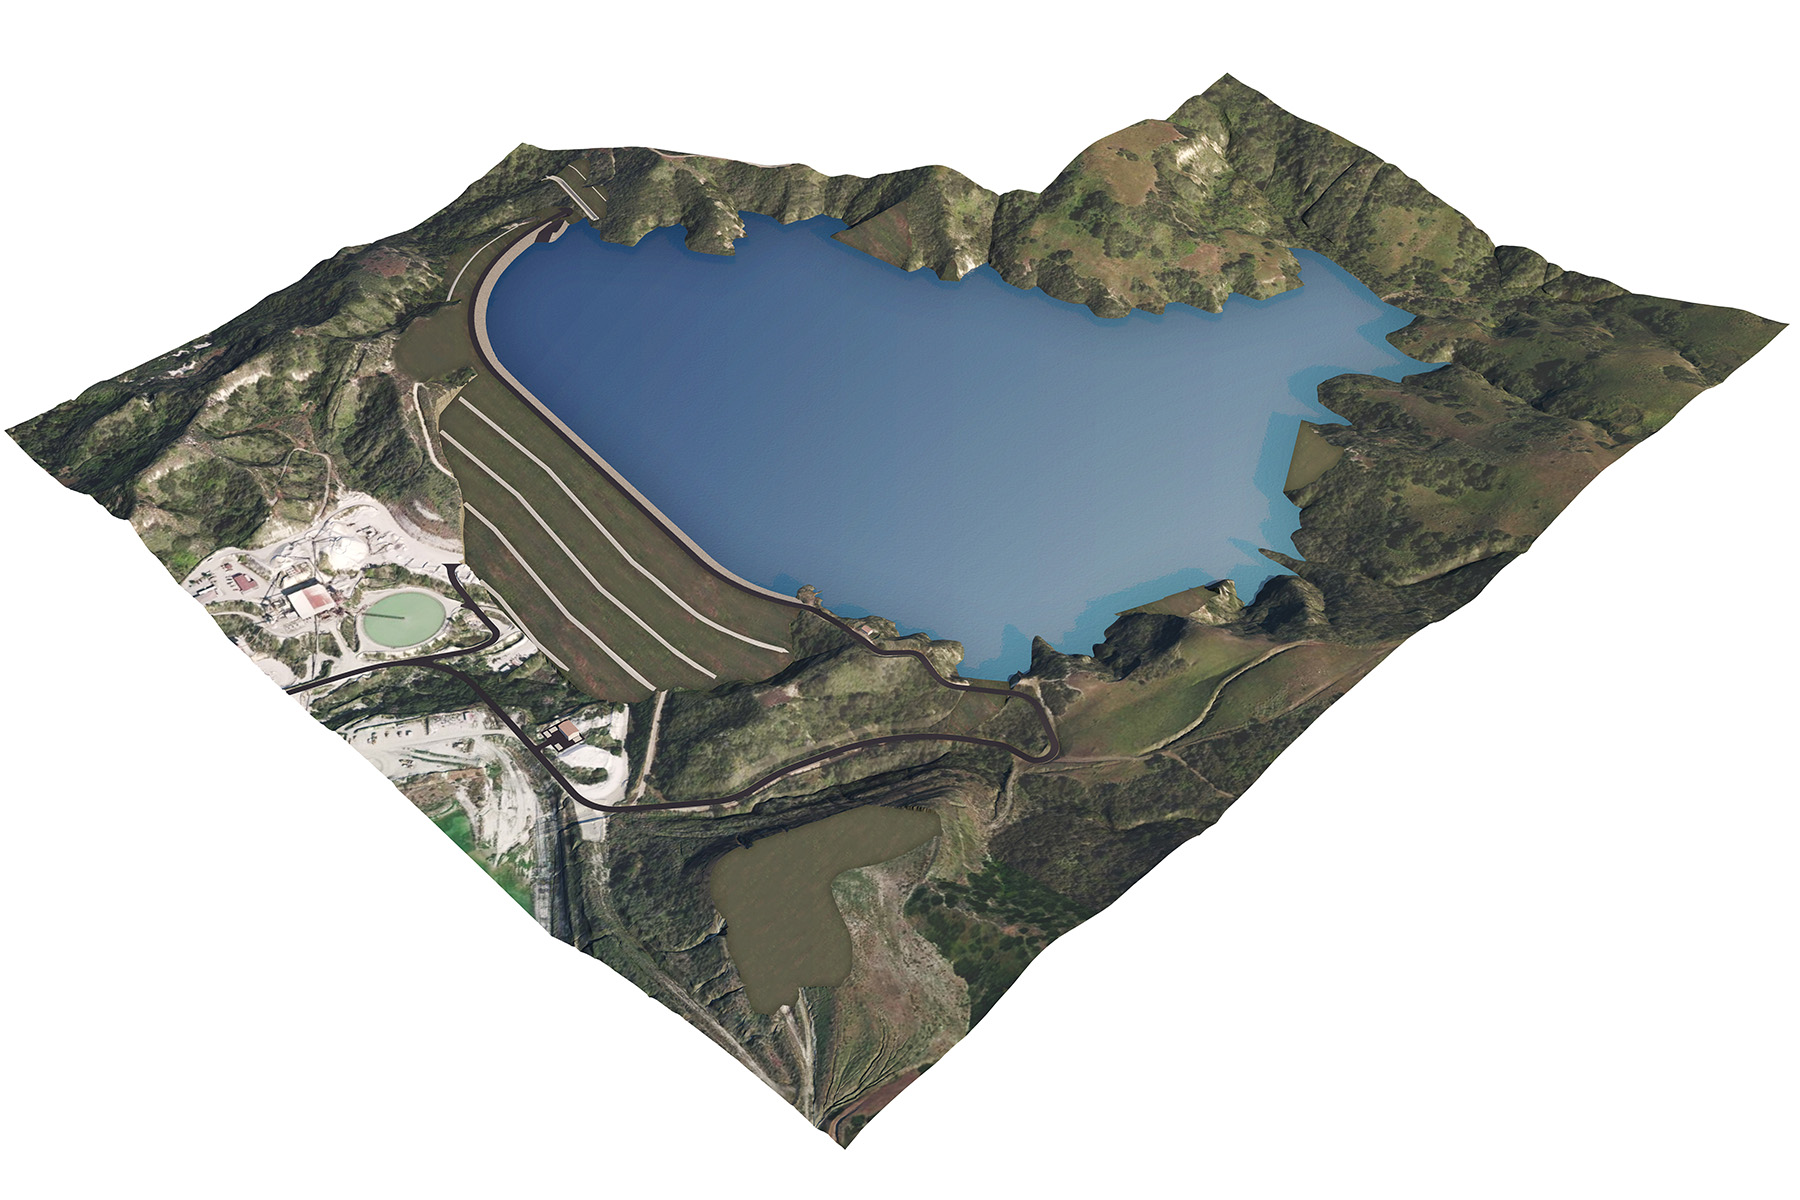 Rendering of a new dam and reservoir